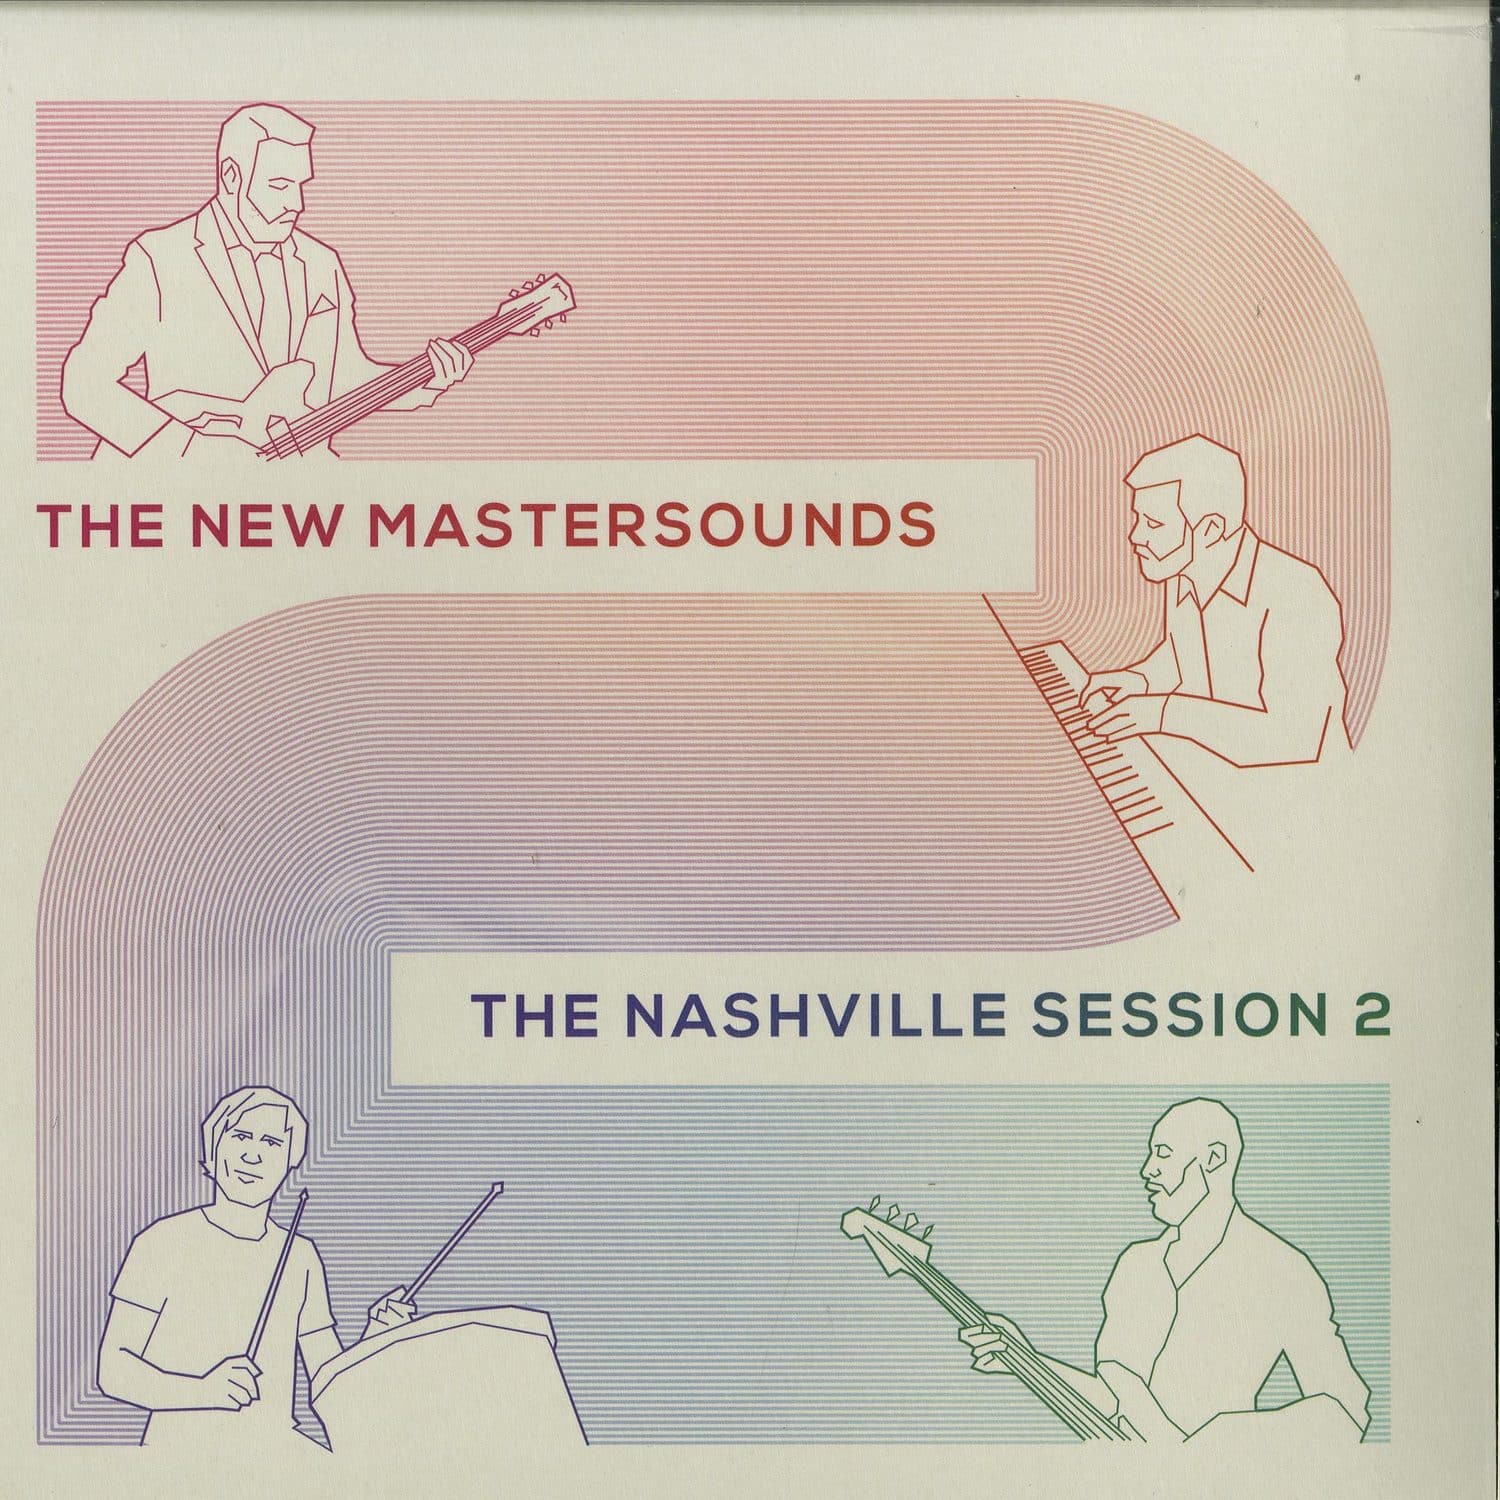 The New Mastersounds - THE NASHVILLE SESSION 2 